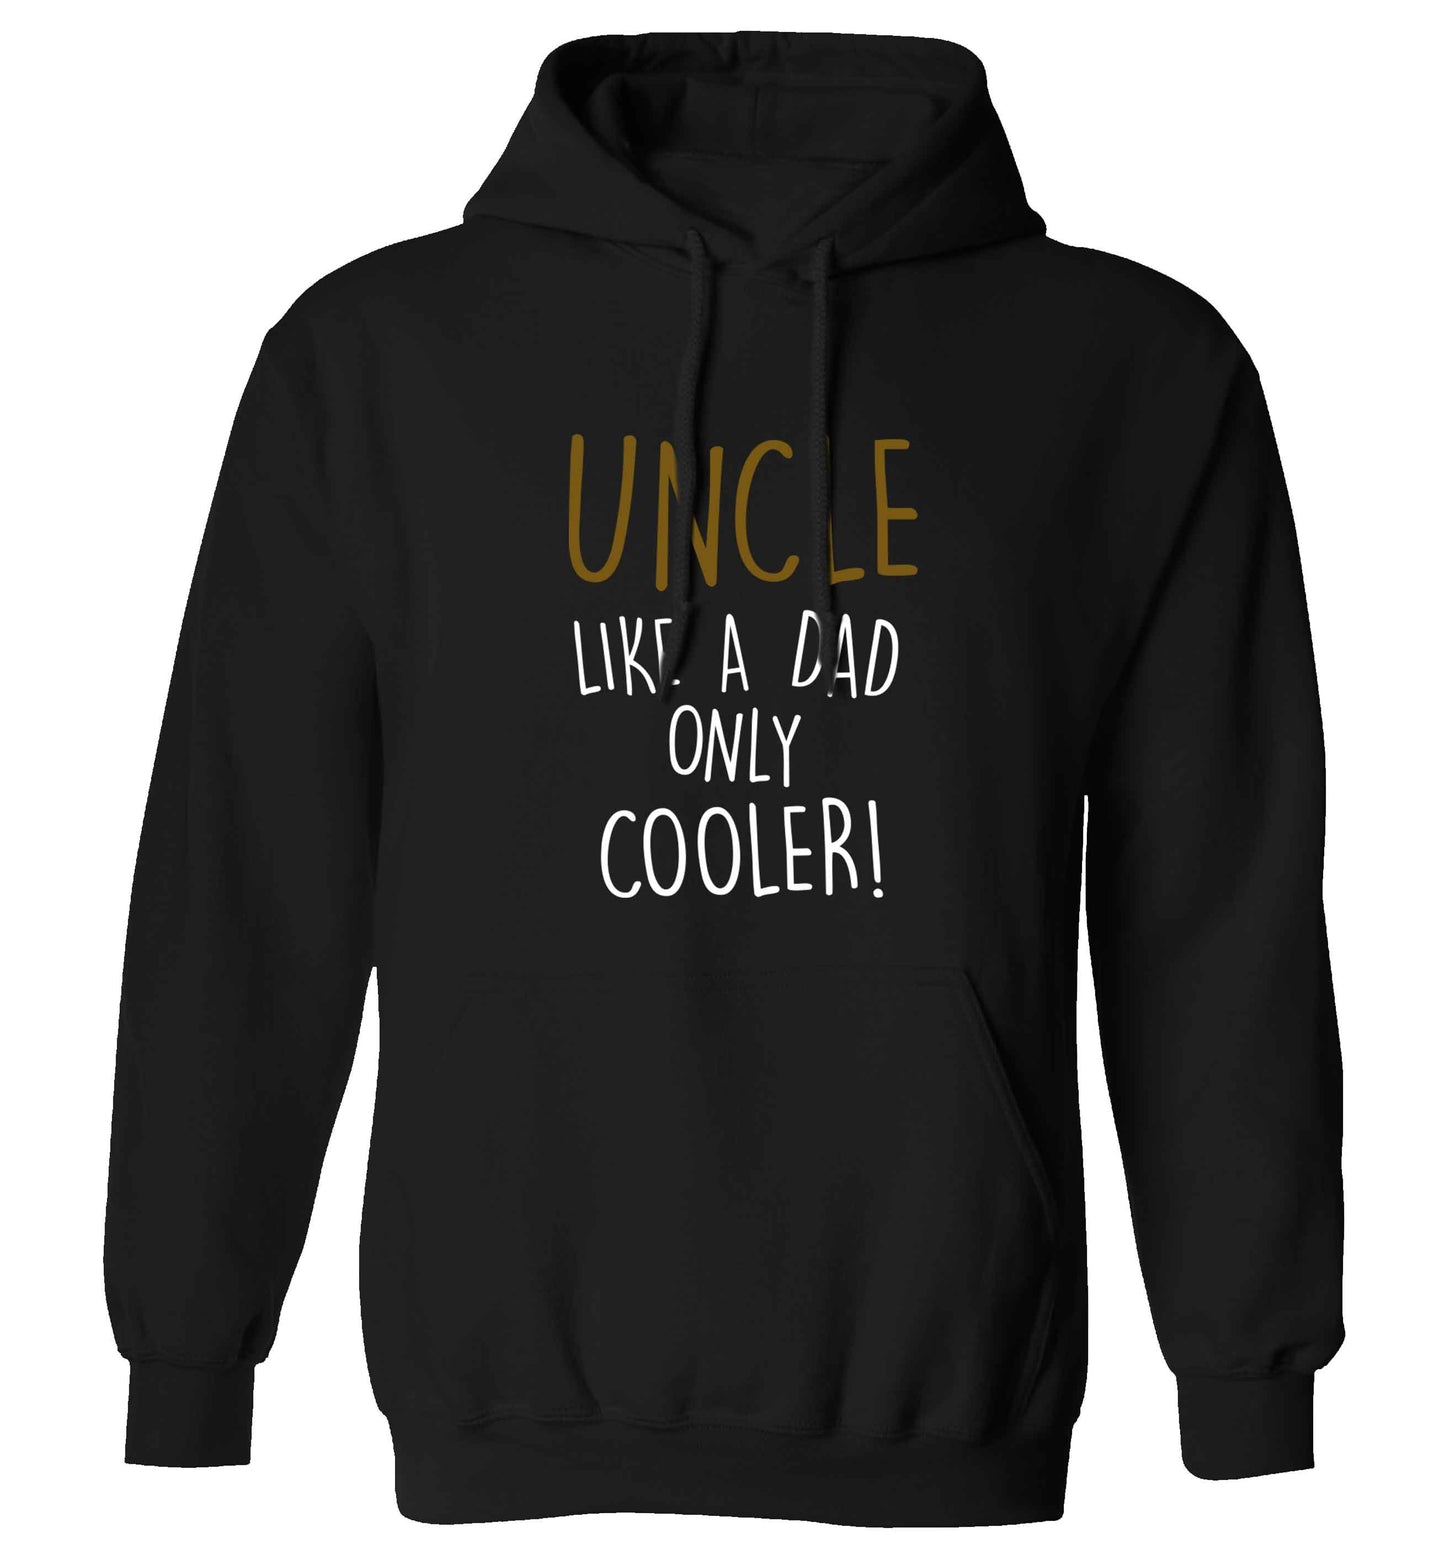 Uncle like a dad only cooler adults unisex black hoodie 2XL